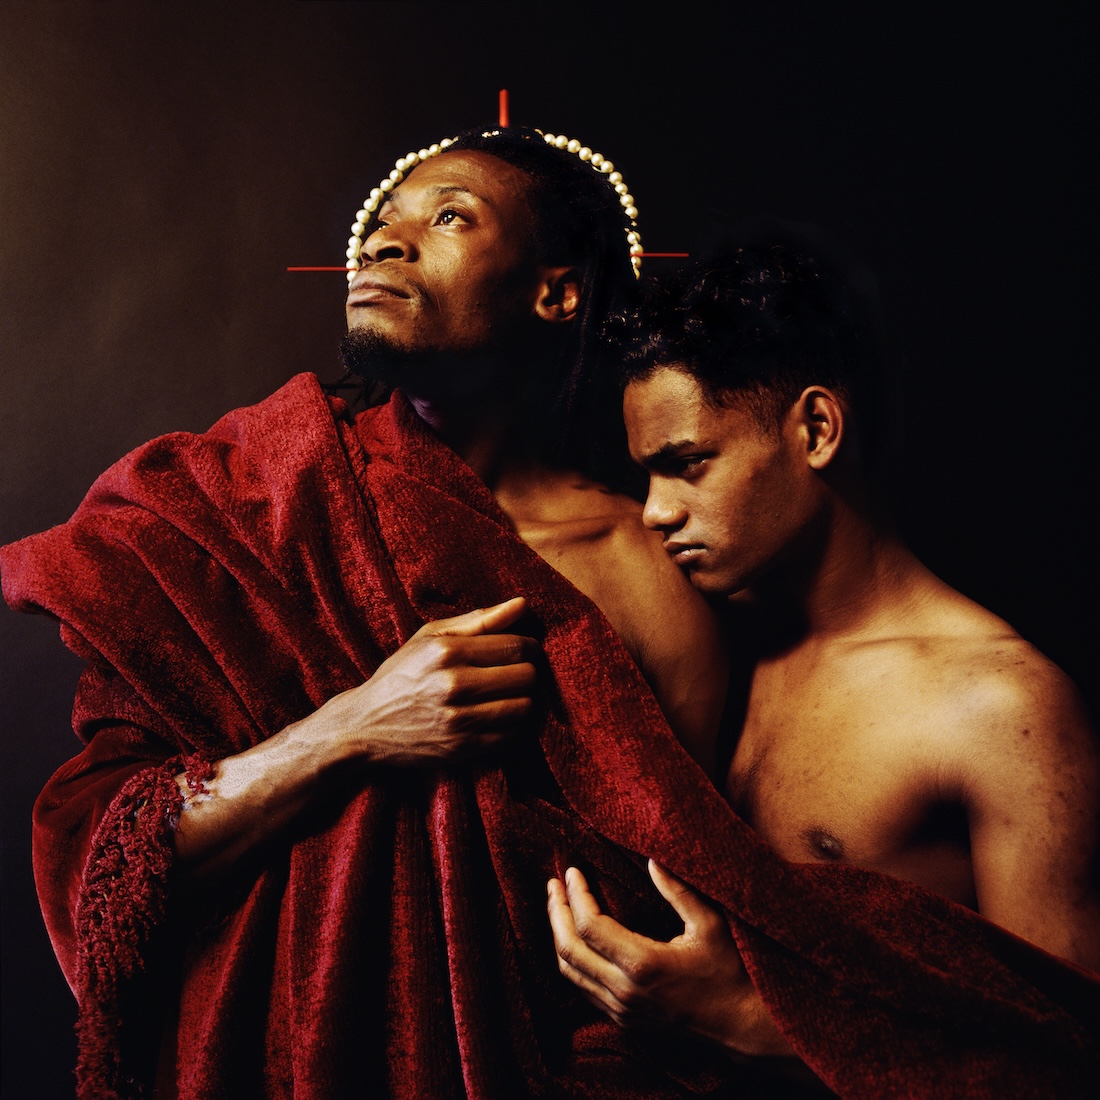 A black man wearing a strung pearl halo and a red shawl looks upward as a younger Black man stands close by his side and leans on him.